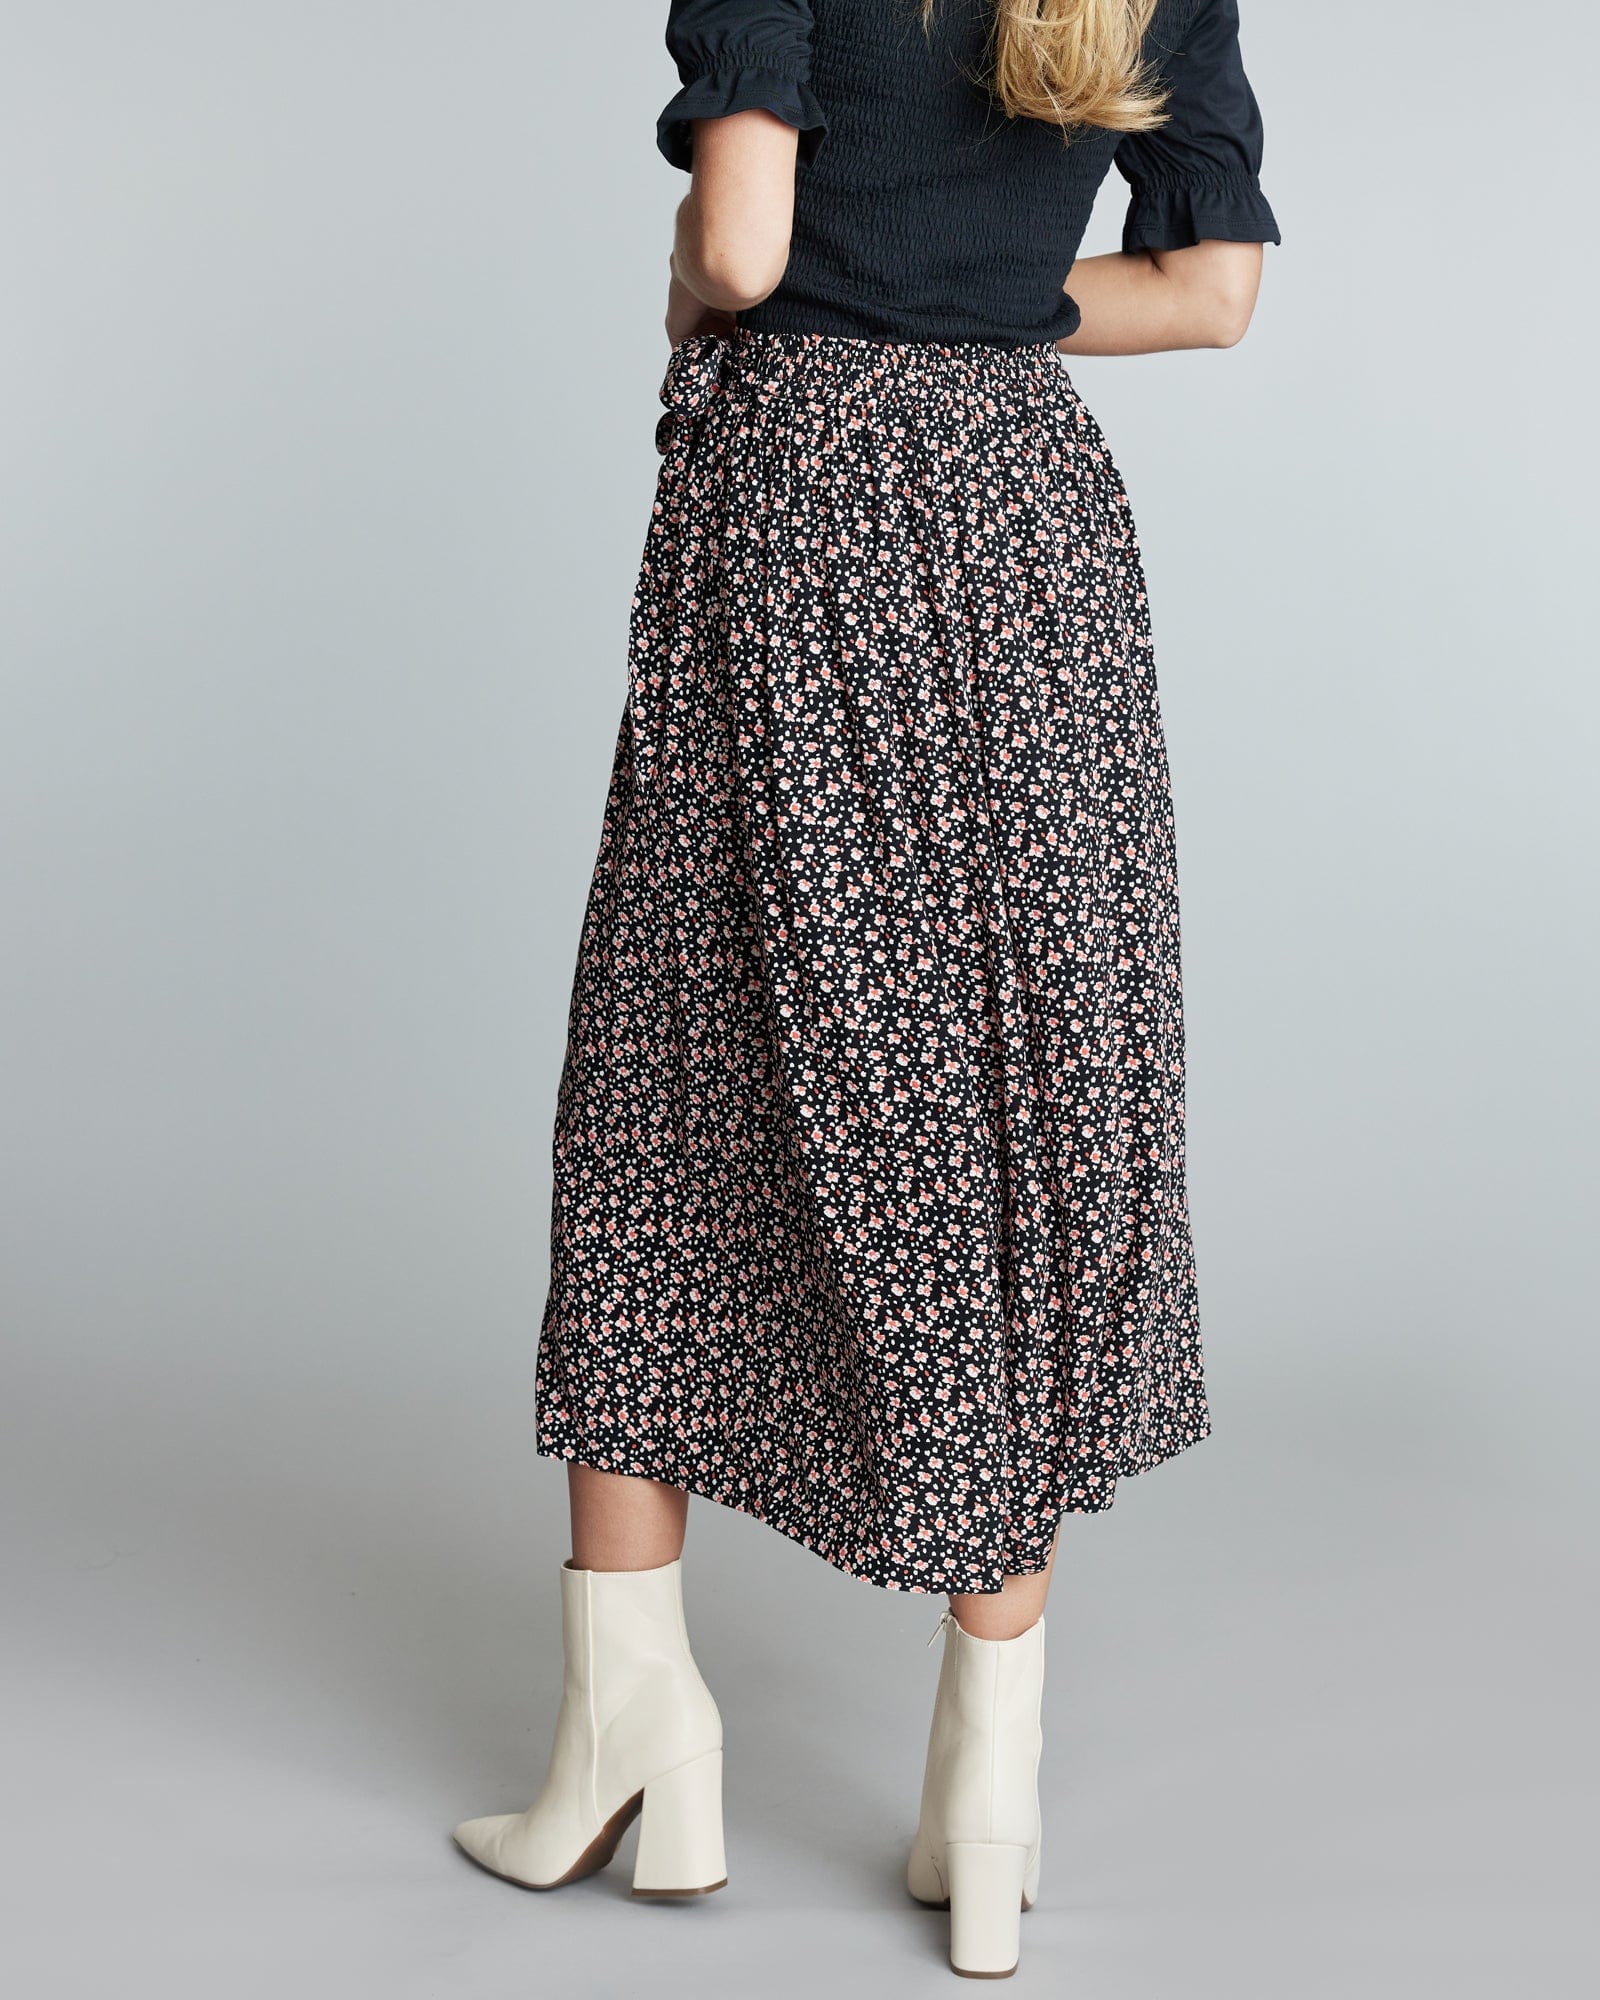 Woman in a midi length floral skirt